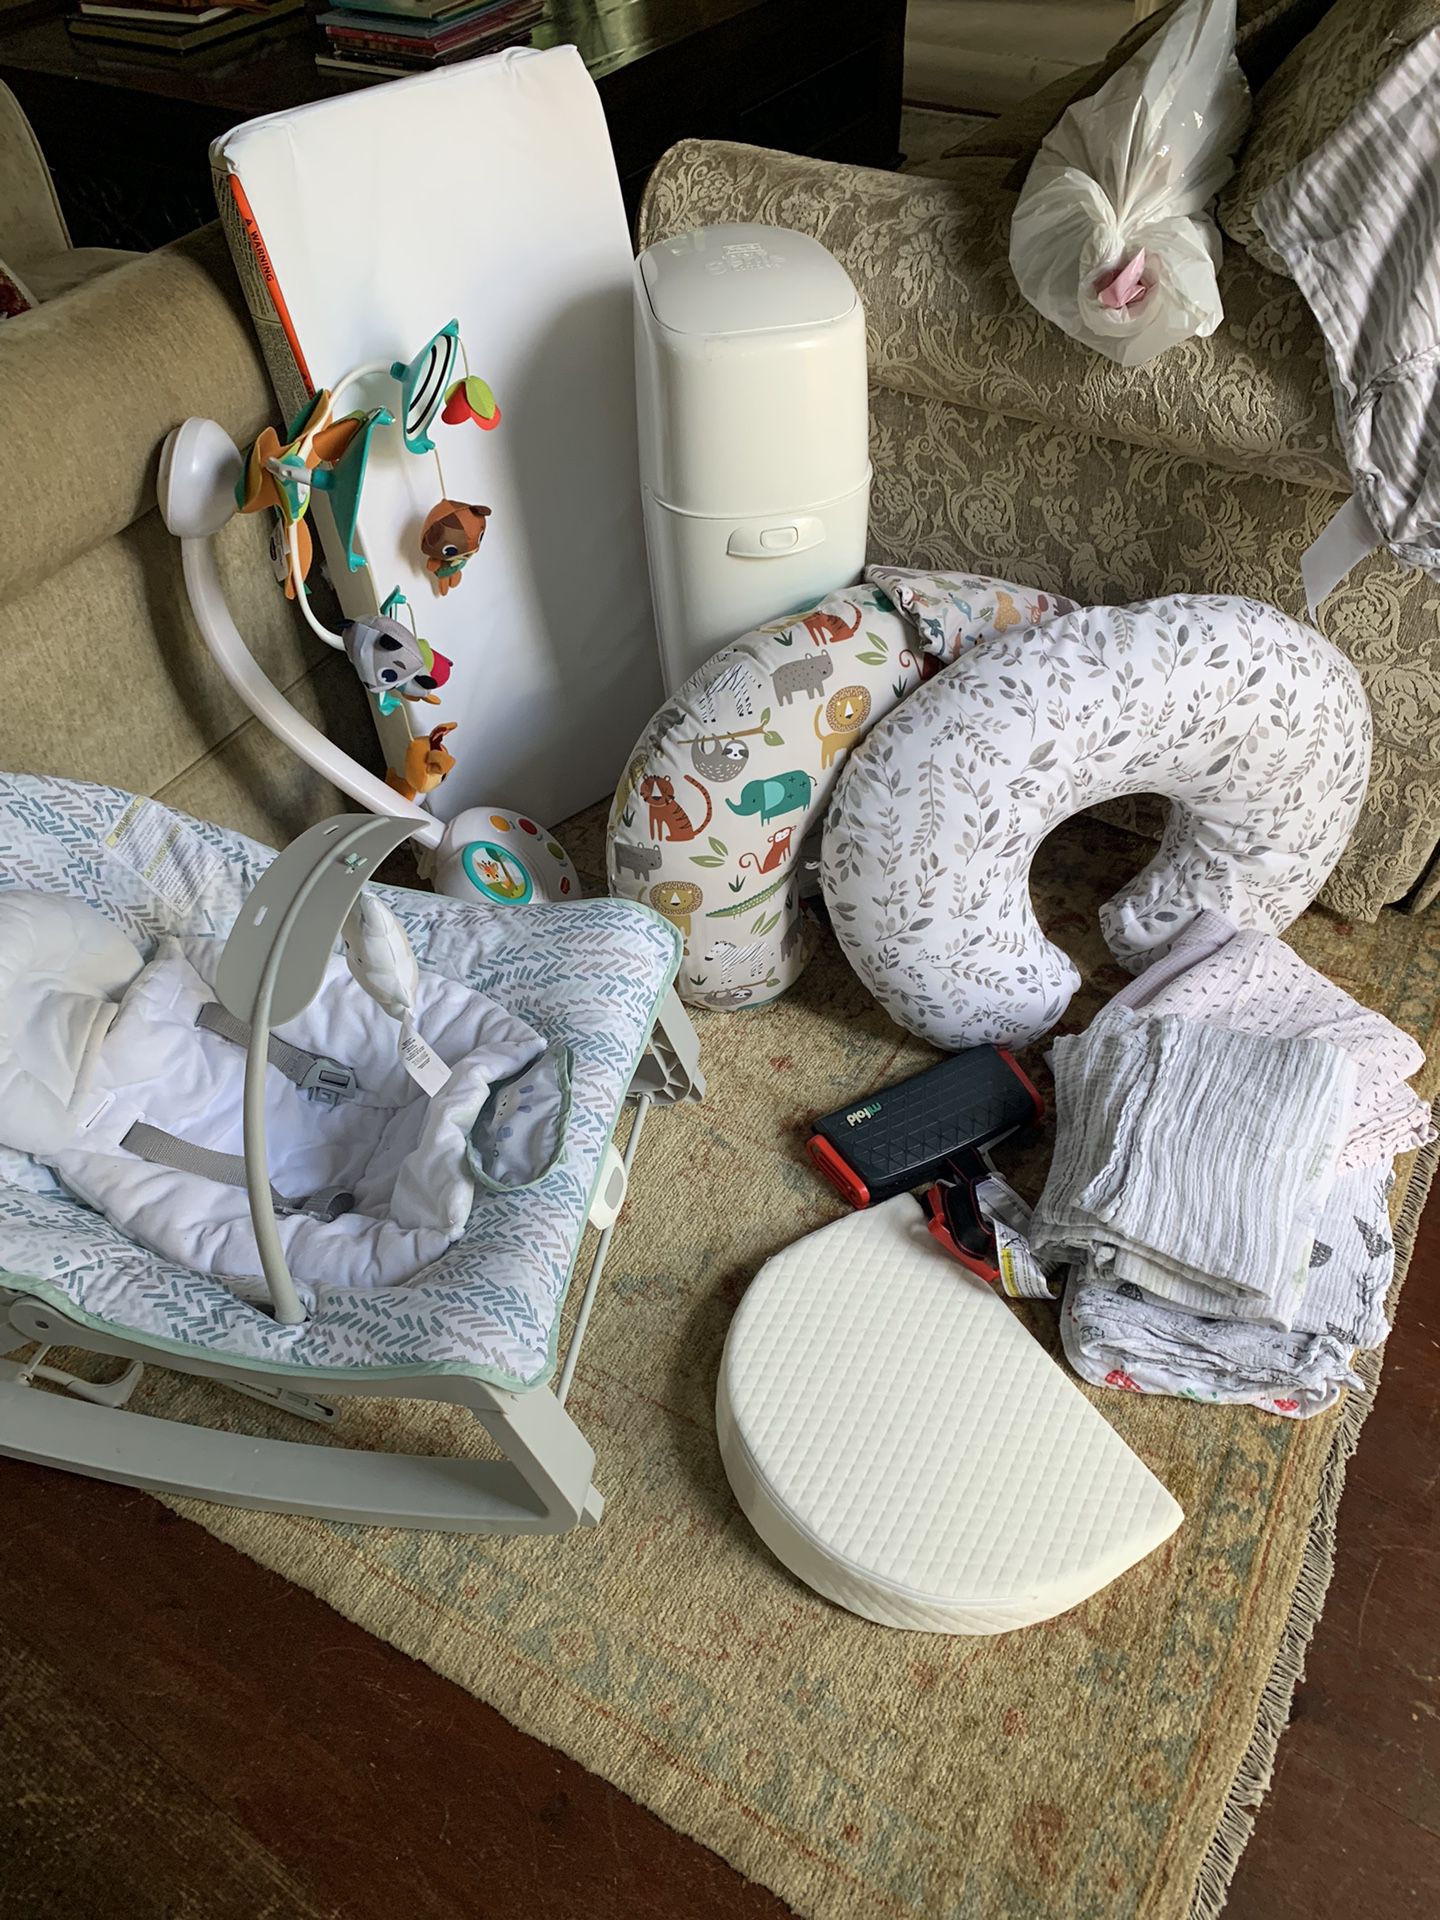 Baby Bundle W/ Diaper Genie, Changing Table Pad, Rocker,  Blankets, Feeding Pillows Etc All Included 